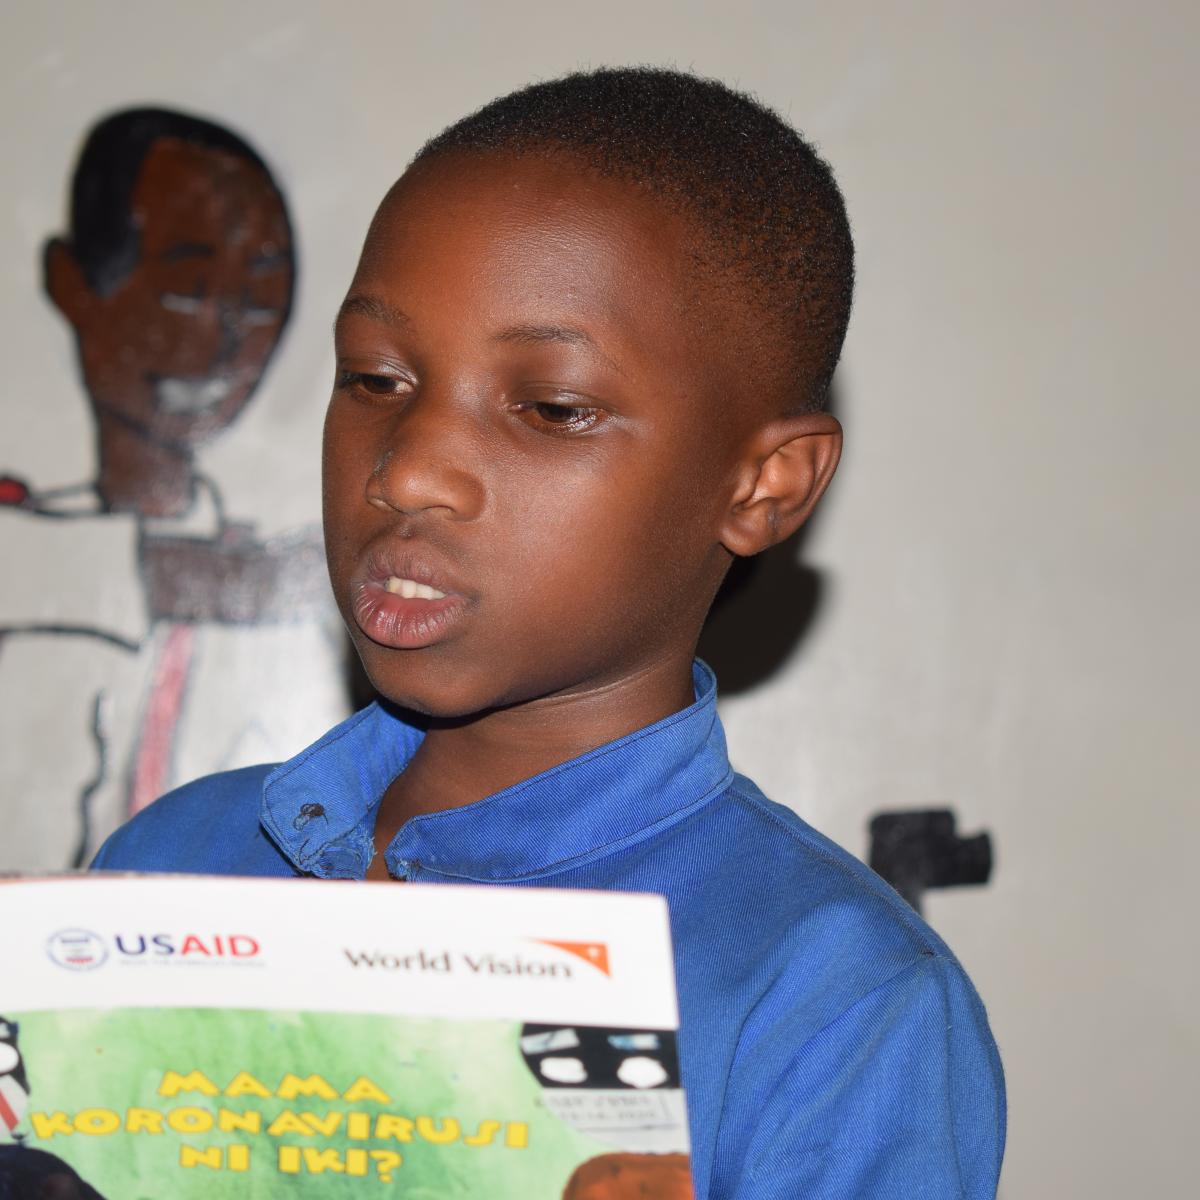 Sarah reading a book printed with the support of USAID.